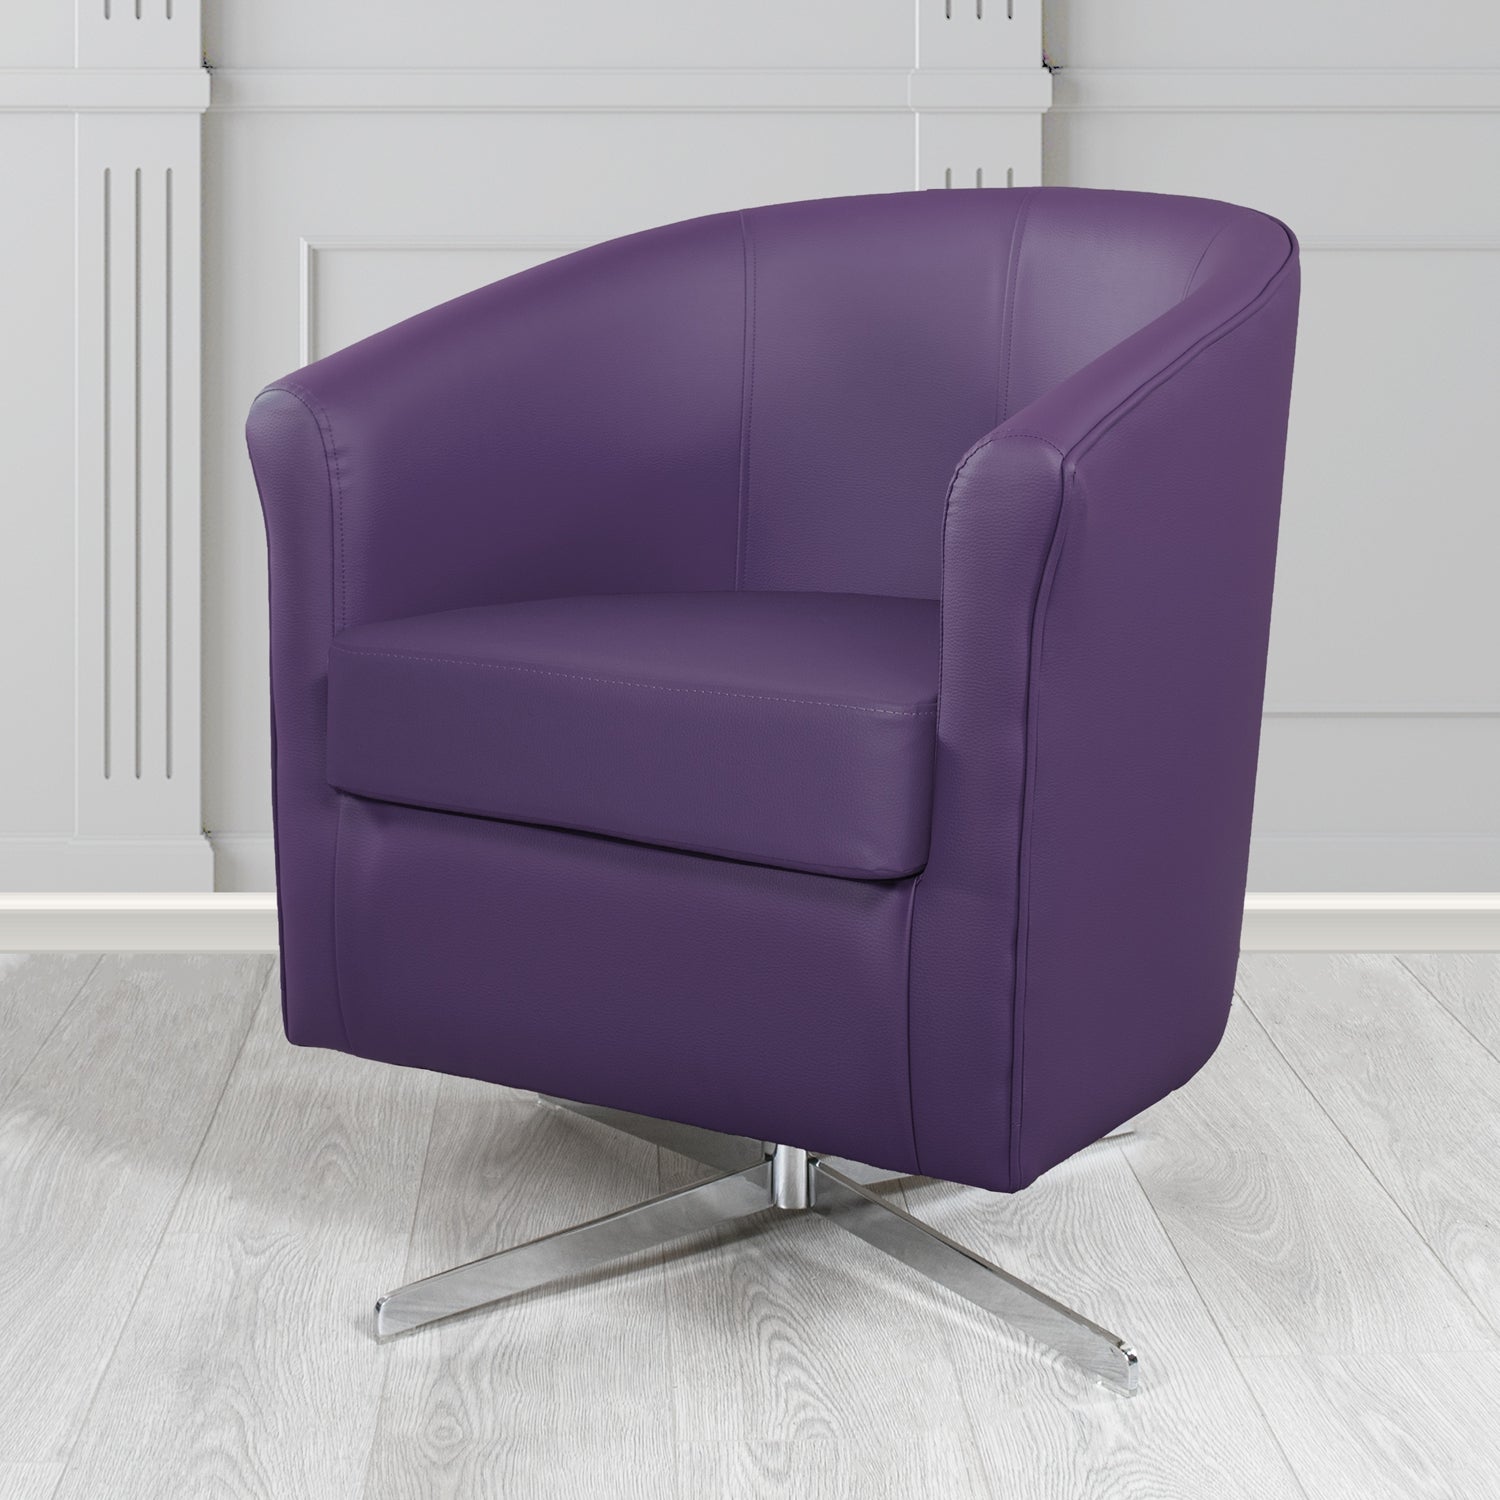 Cannes Swivel Tub Chair in Just Colour Blackberry Crib 5 Faux Leather - The Tub Chair Shop